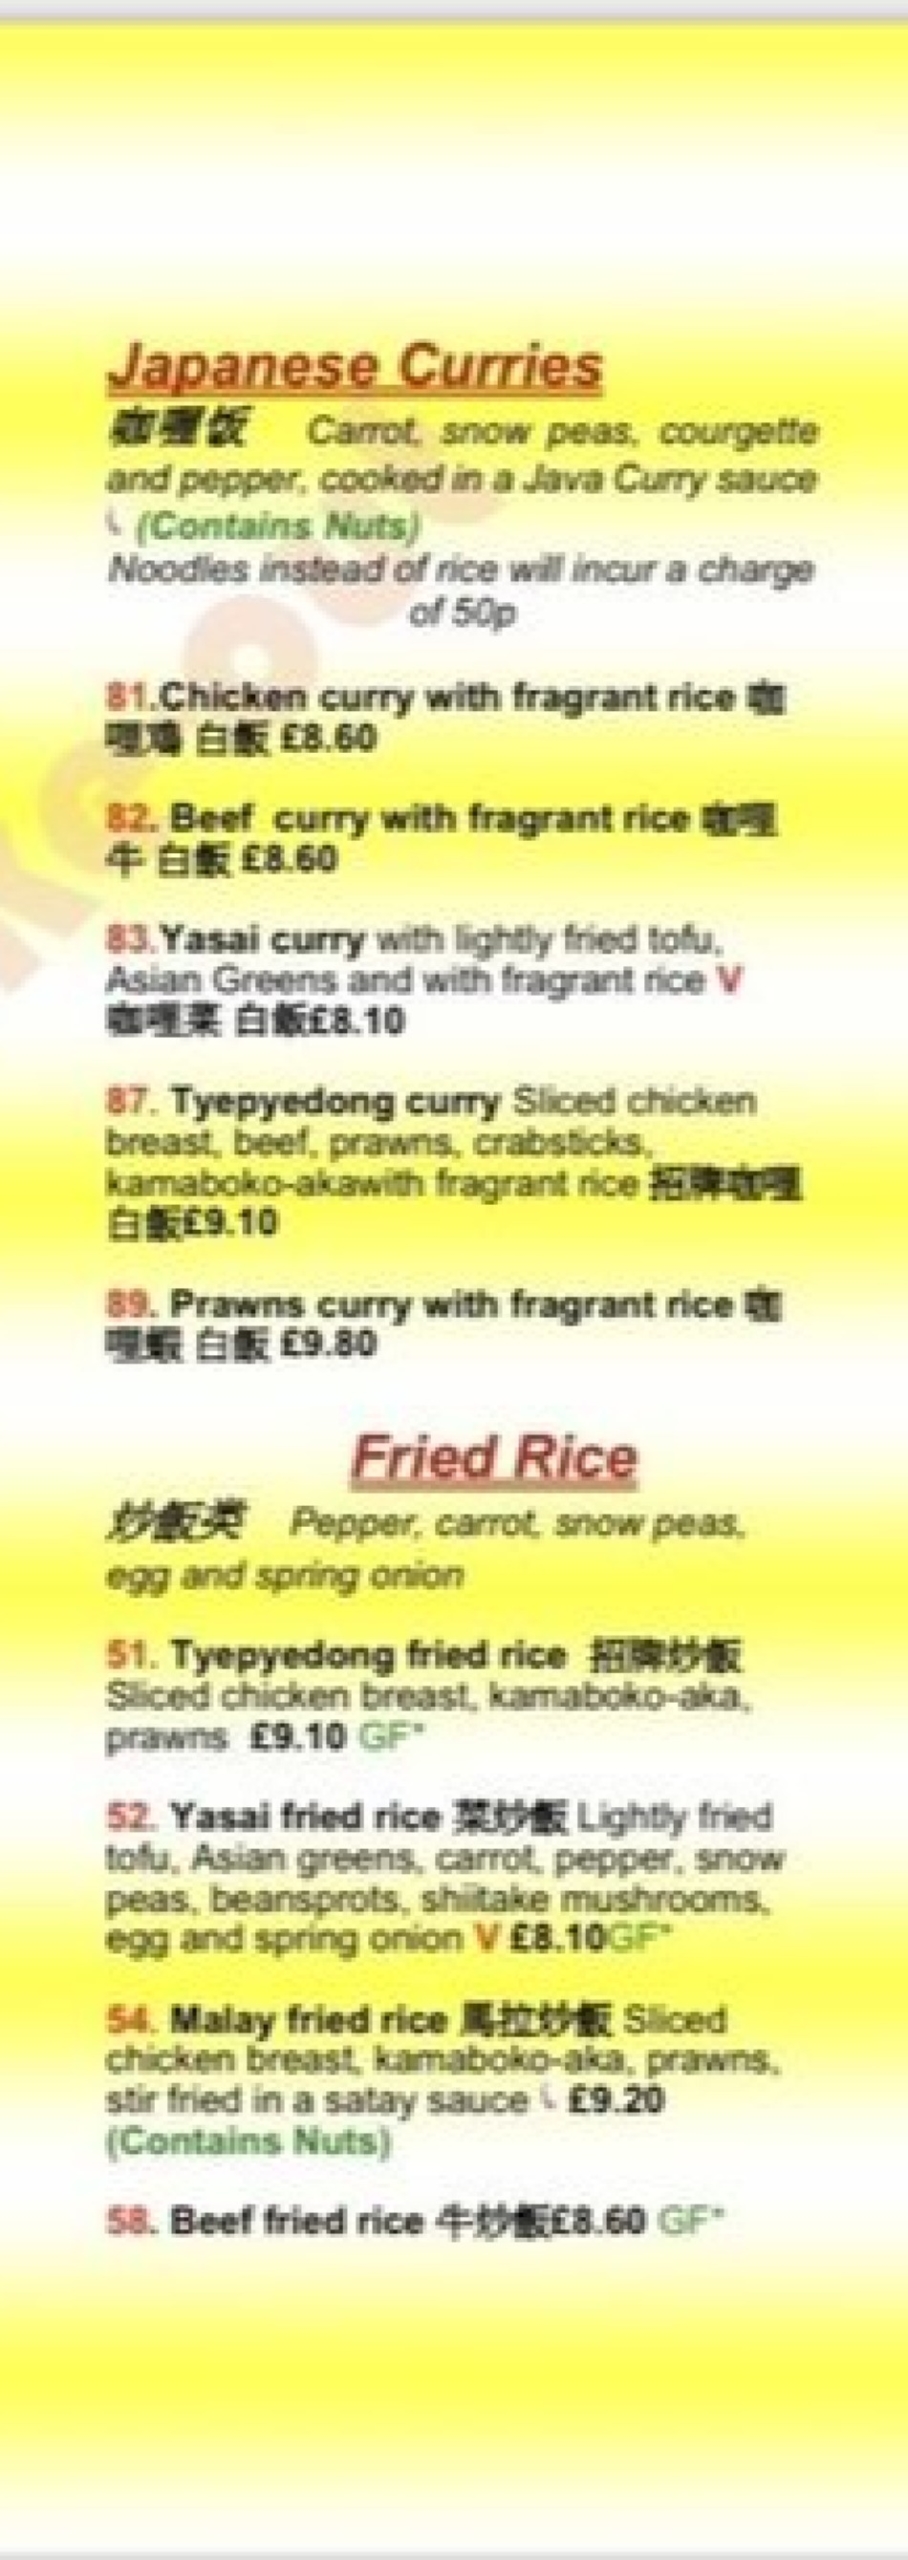 Takeaway Restaurant Menu Page - Tyepyedong Noodle Bar - Exeter